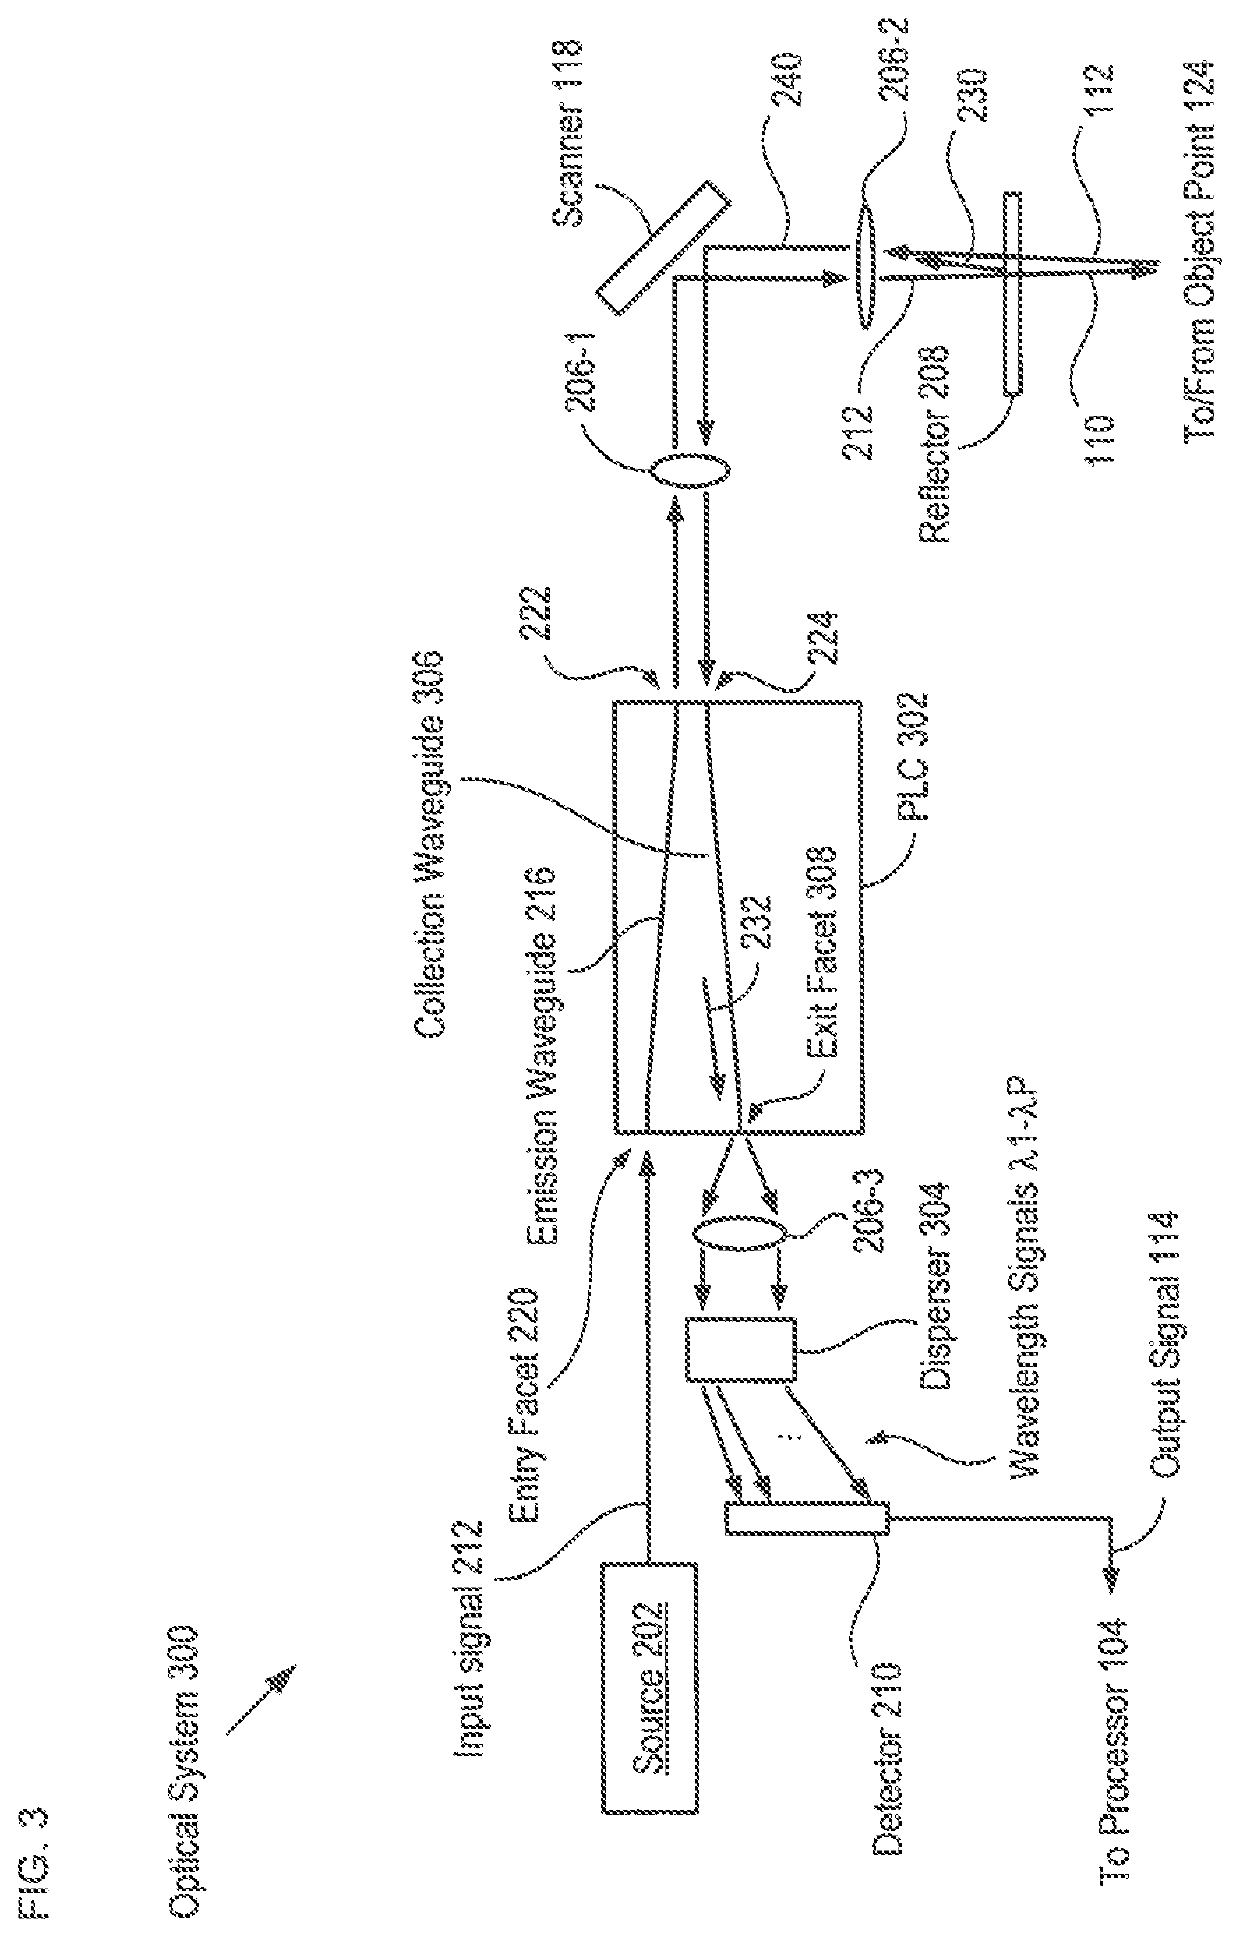 Common-path integrated low coherence interferometry system and method therefor